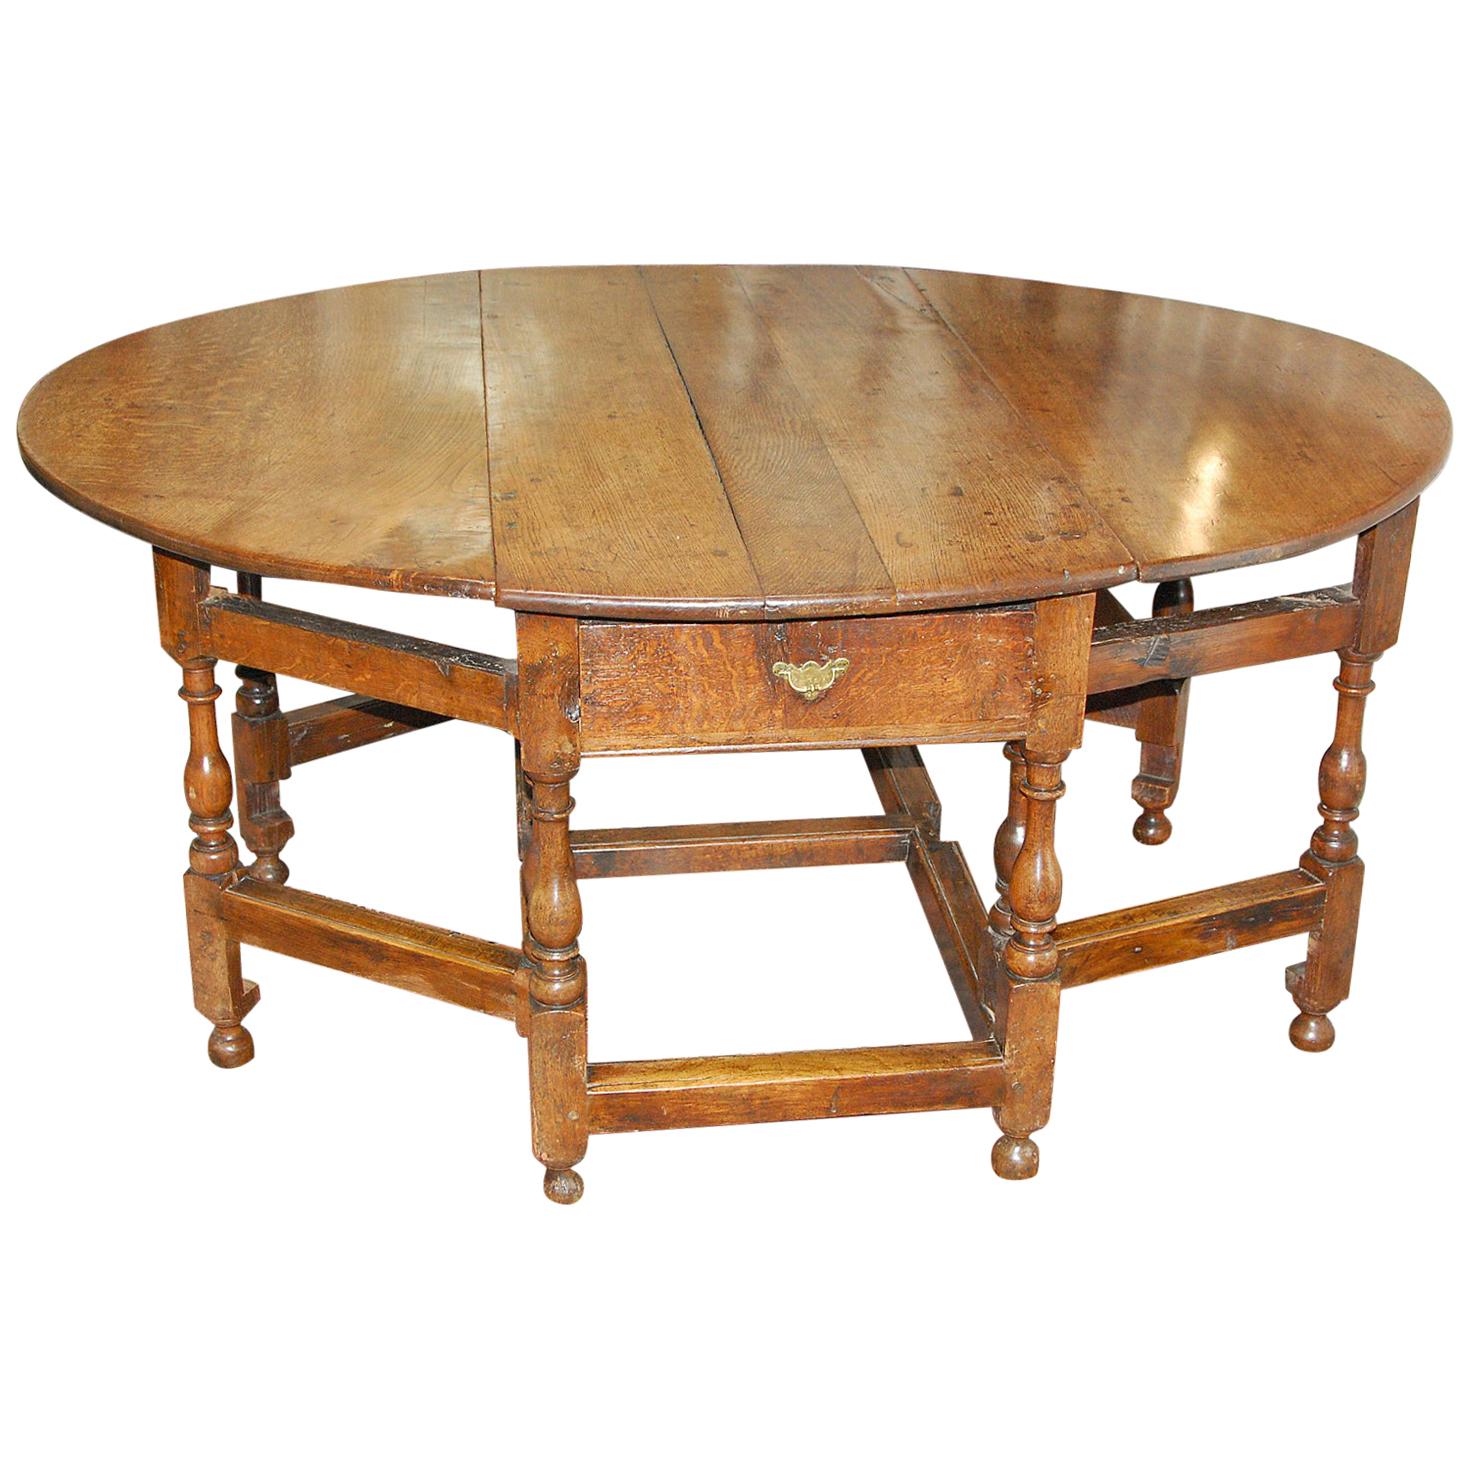 English Early 18th Century Large Oak Dropleaf Double Swing Leg Dining Table For Sale